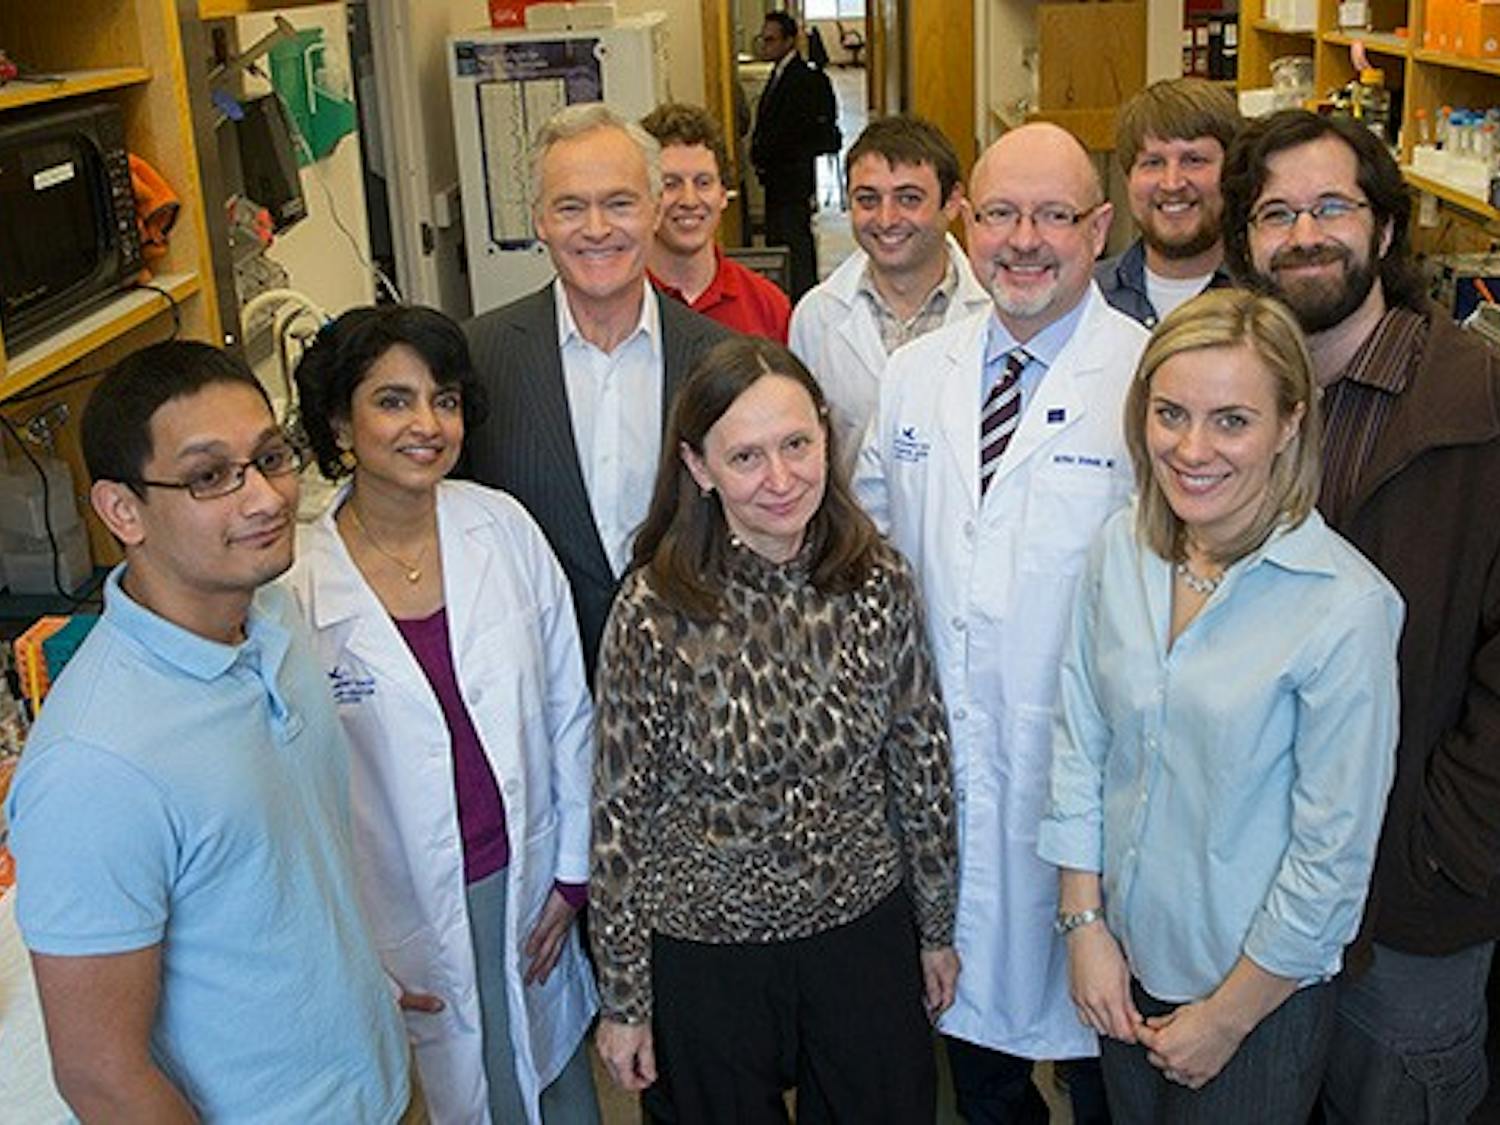 A team of Duke&nbsp;researchers found that brain cancer patients who received a poliovirus treatment had a 20 percent three-year survival rate.